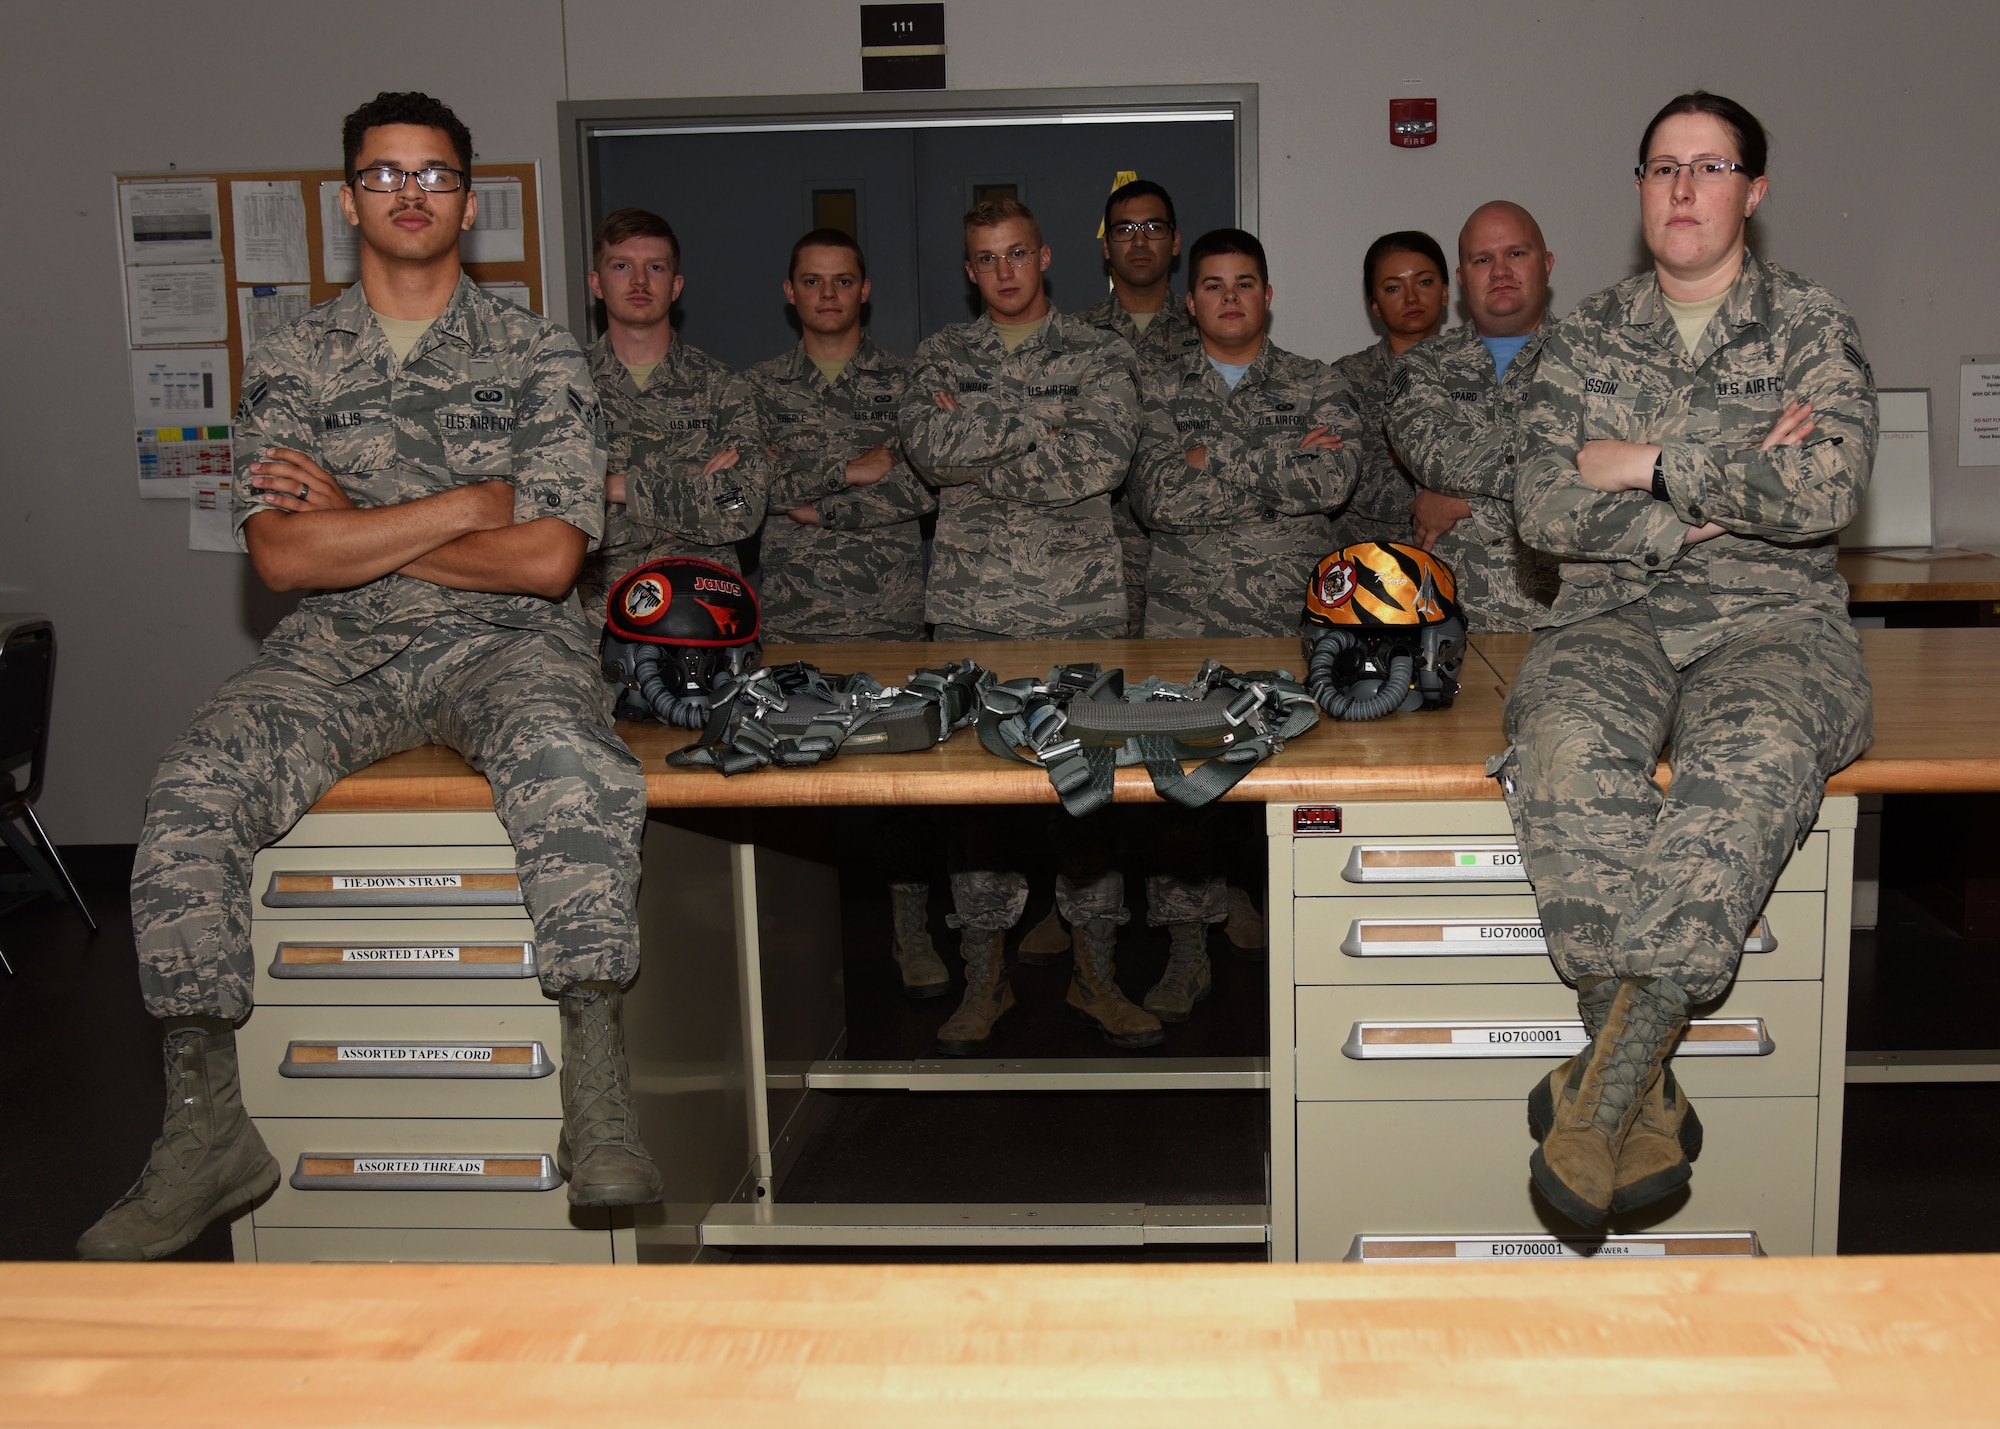 Technicians from 28th Operations Support Squadron aircrew flight equipment shop stand together at Ellsworth Air Force Base, S.D., Aug. 10, 2018. AFE technicians are tasked with performing thorough inspections on equipment such as aircrew helmets, oxygen masks and harnesses, as well as making any necessary repairs. (U.S. Air Force photo by Senior Airman Denise Jenson)